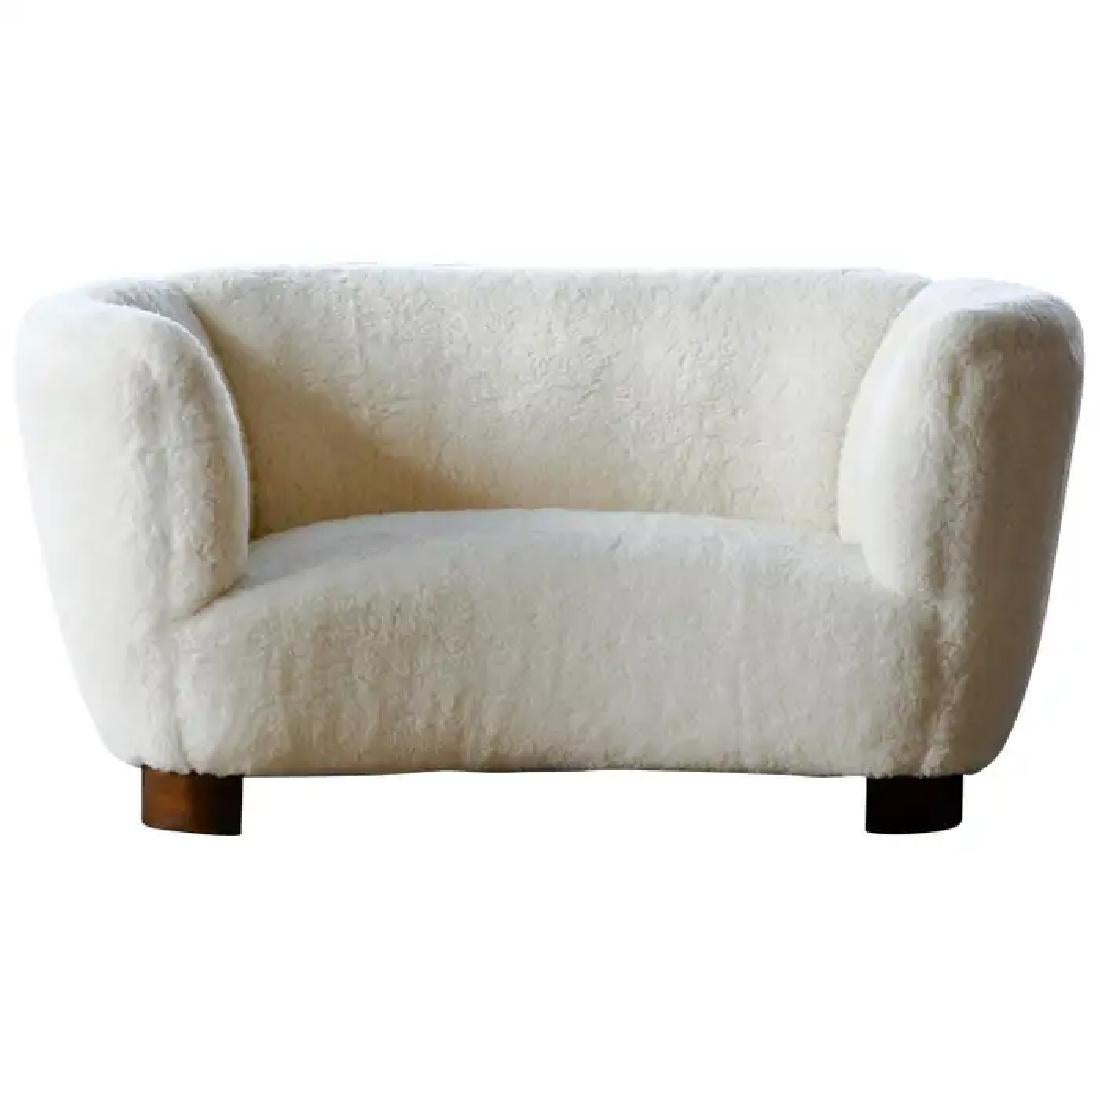 Banana shaped Viggo Boesen style curved two-seat sofa or loveseat made in Denmark in the 1940s. This sofa will make a strong statement in any room. Beautiful round lines and iconic ball feet normally associated with Viggo Boesen. Fully refurbished